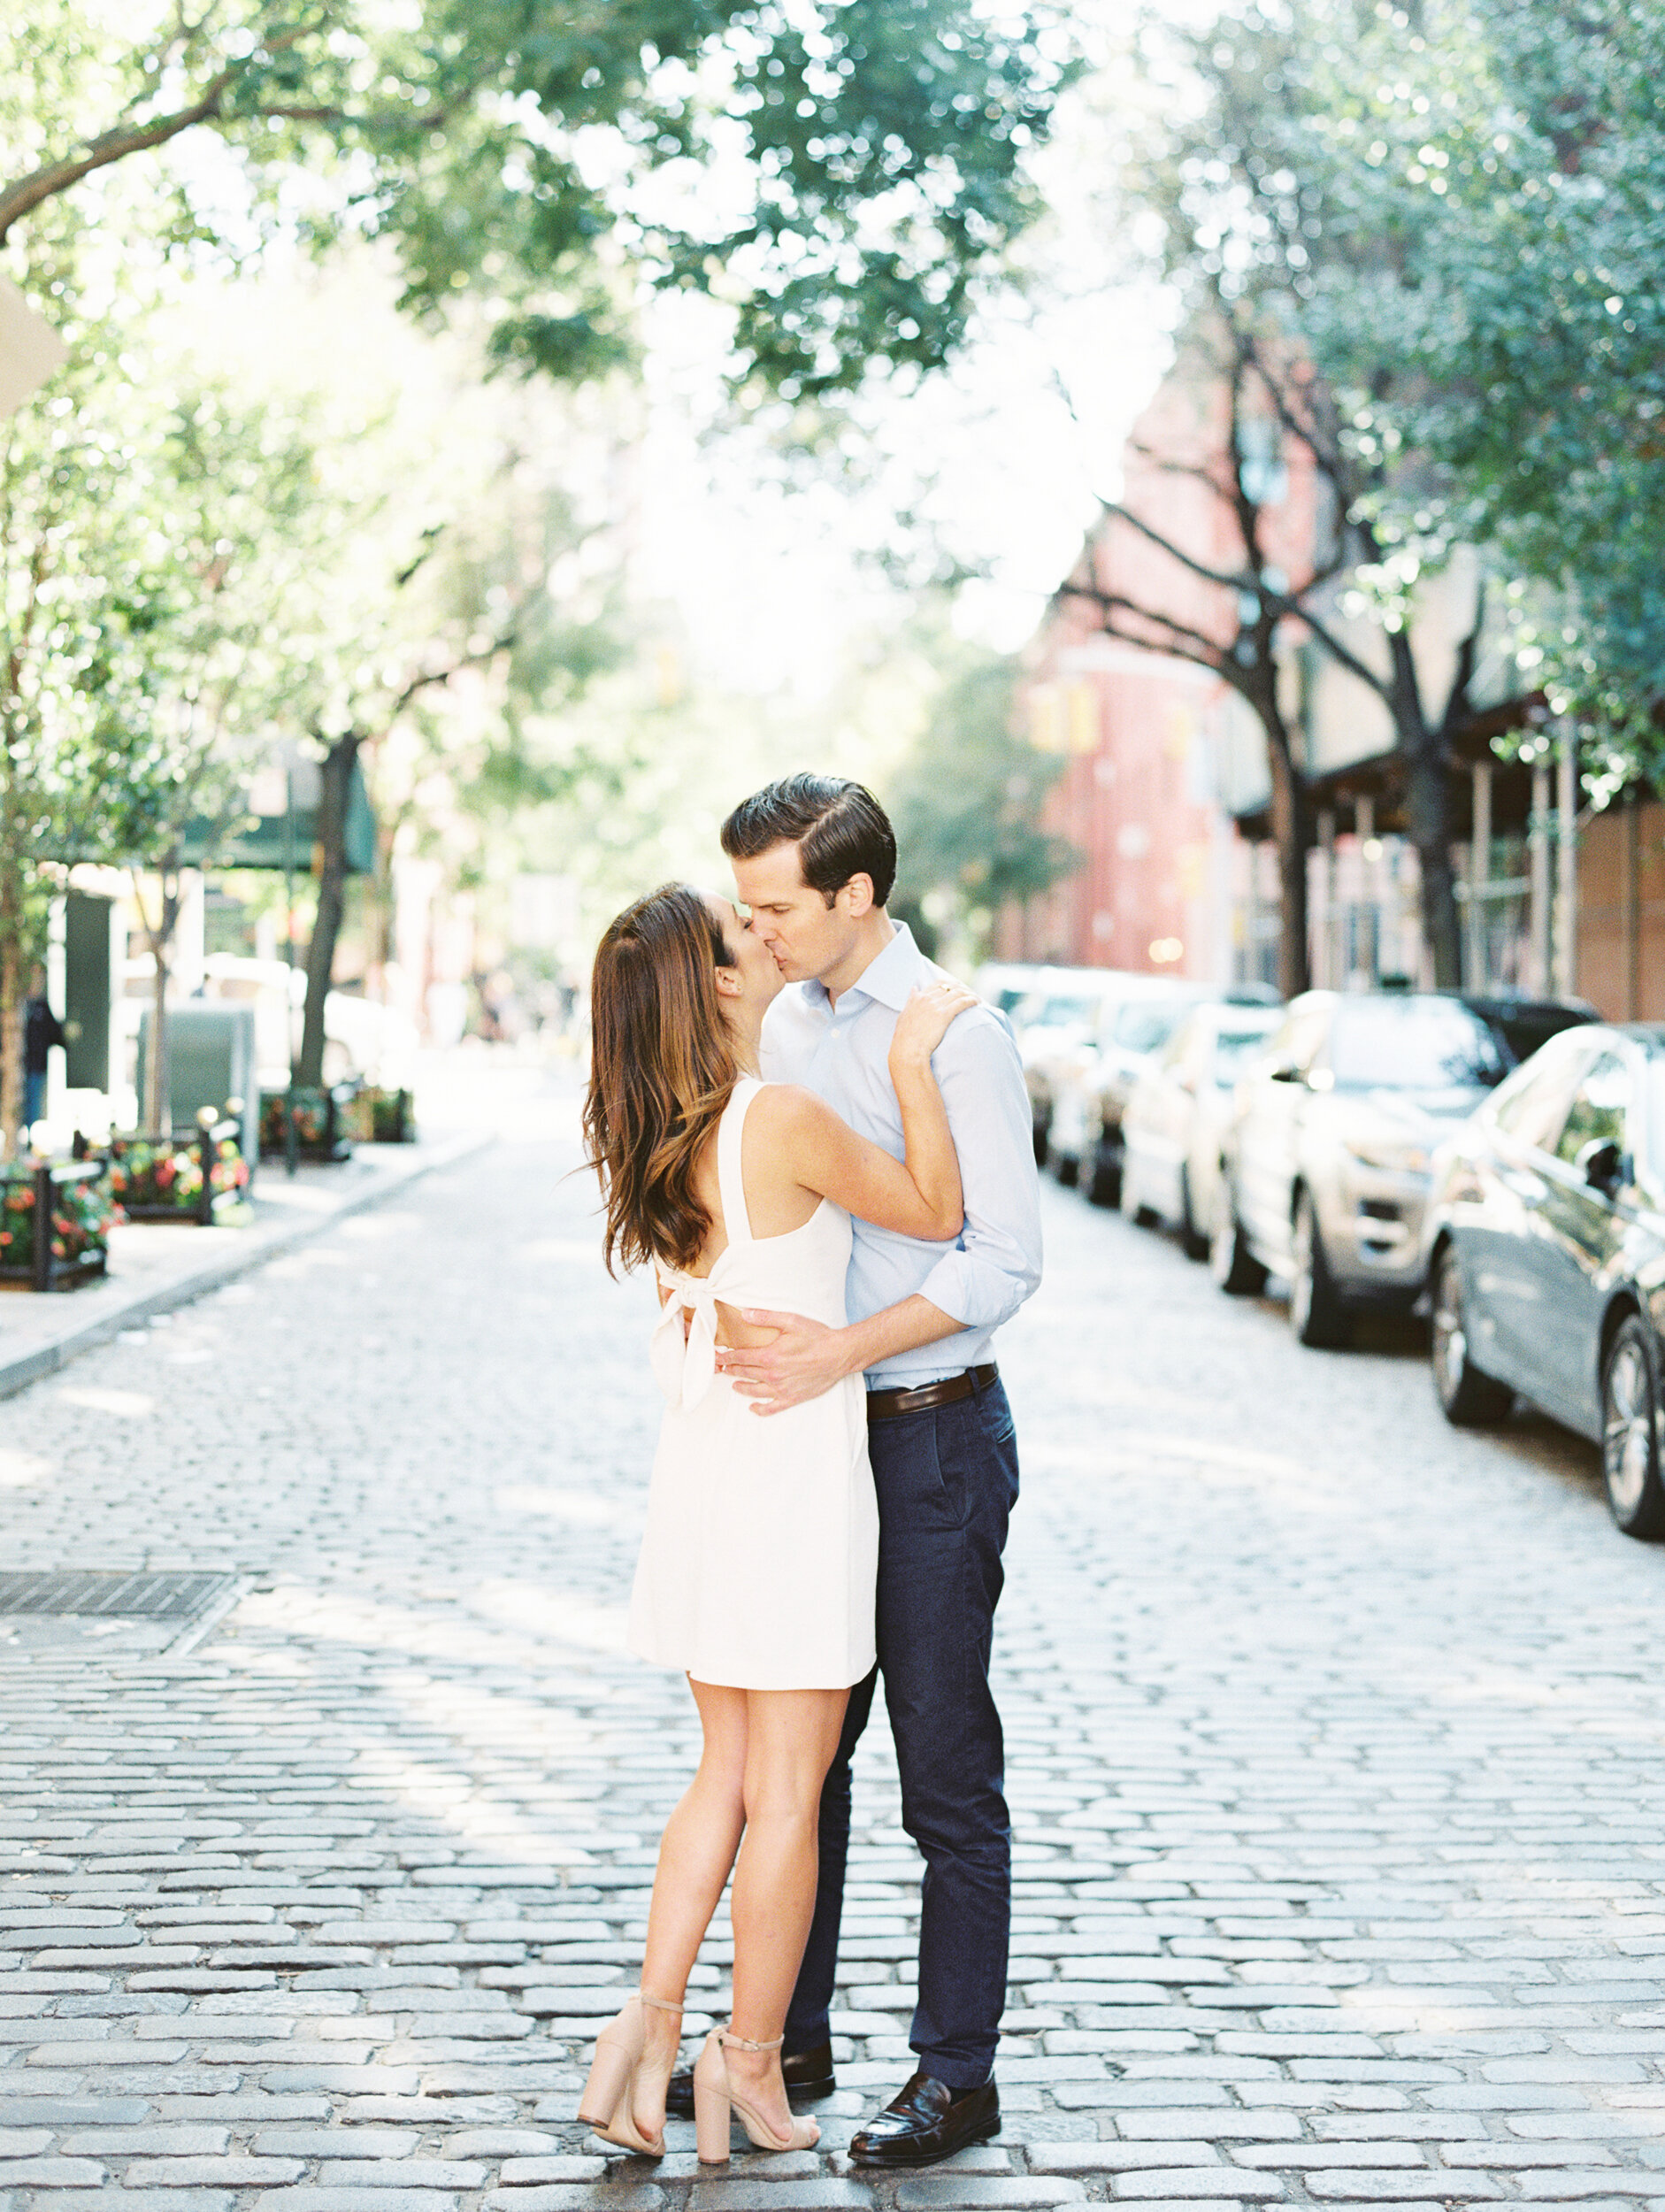 Couple Kissing on Cobblestones Streets in New York City